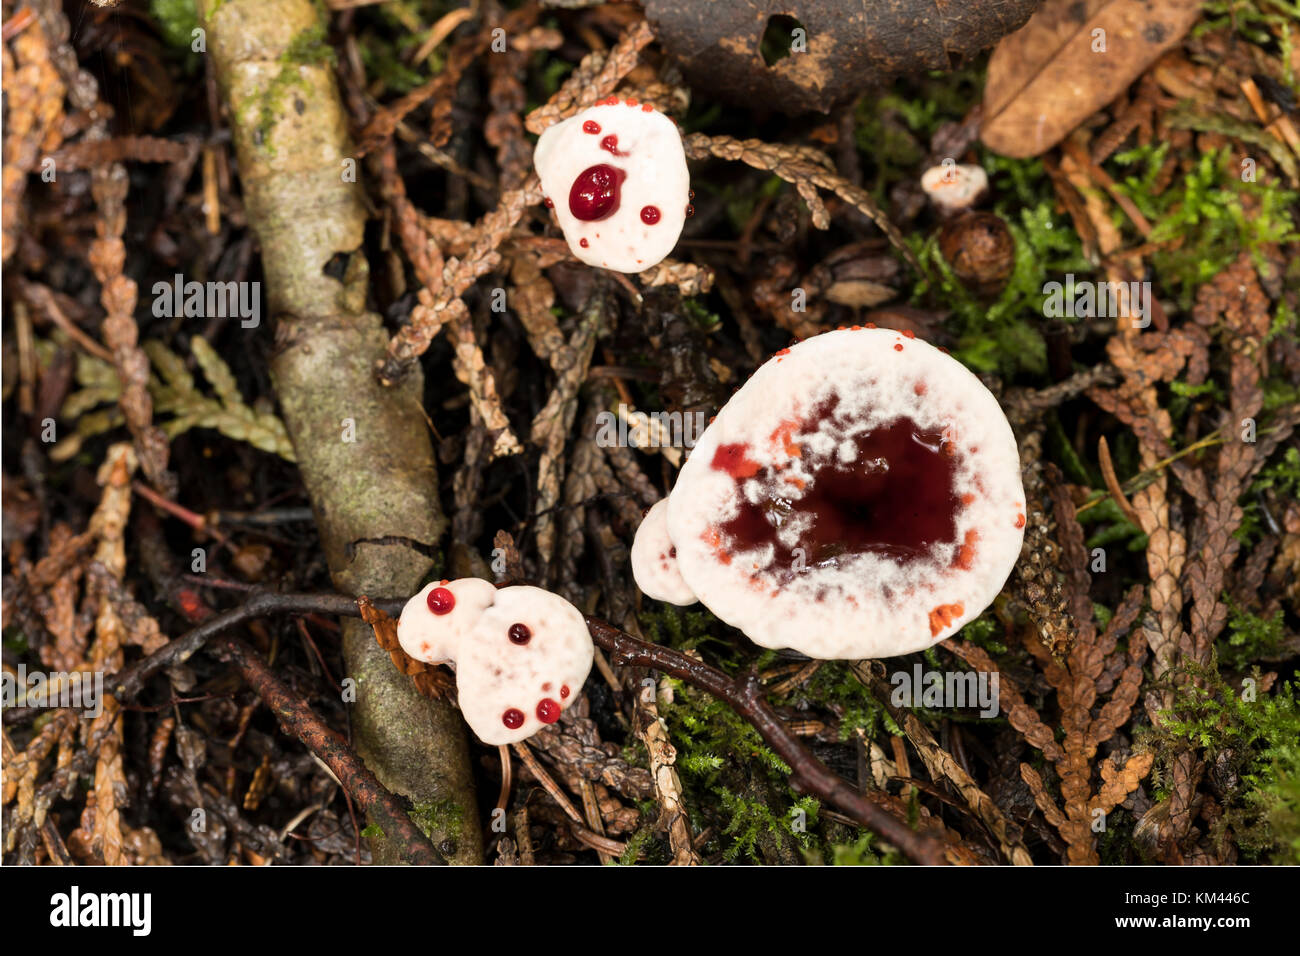 Bleeding Tooth Fungus (Hydnellum peckii) growing on boreal forest, Isle Royal National Park Stock Photo